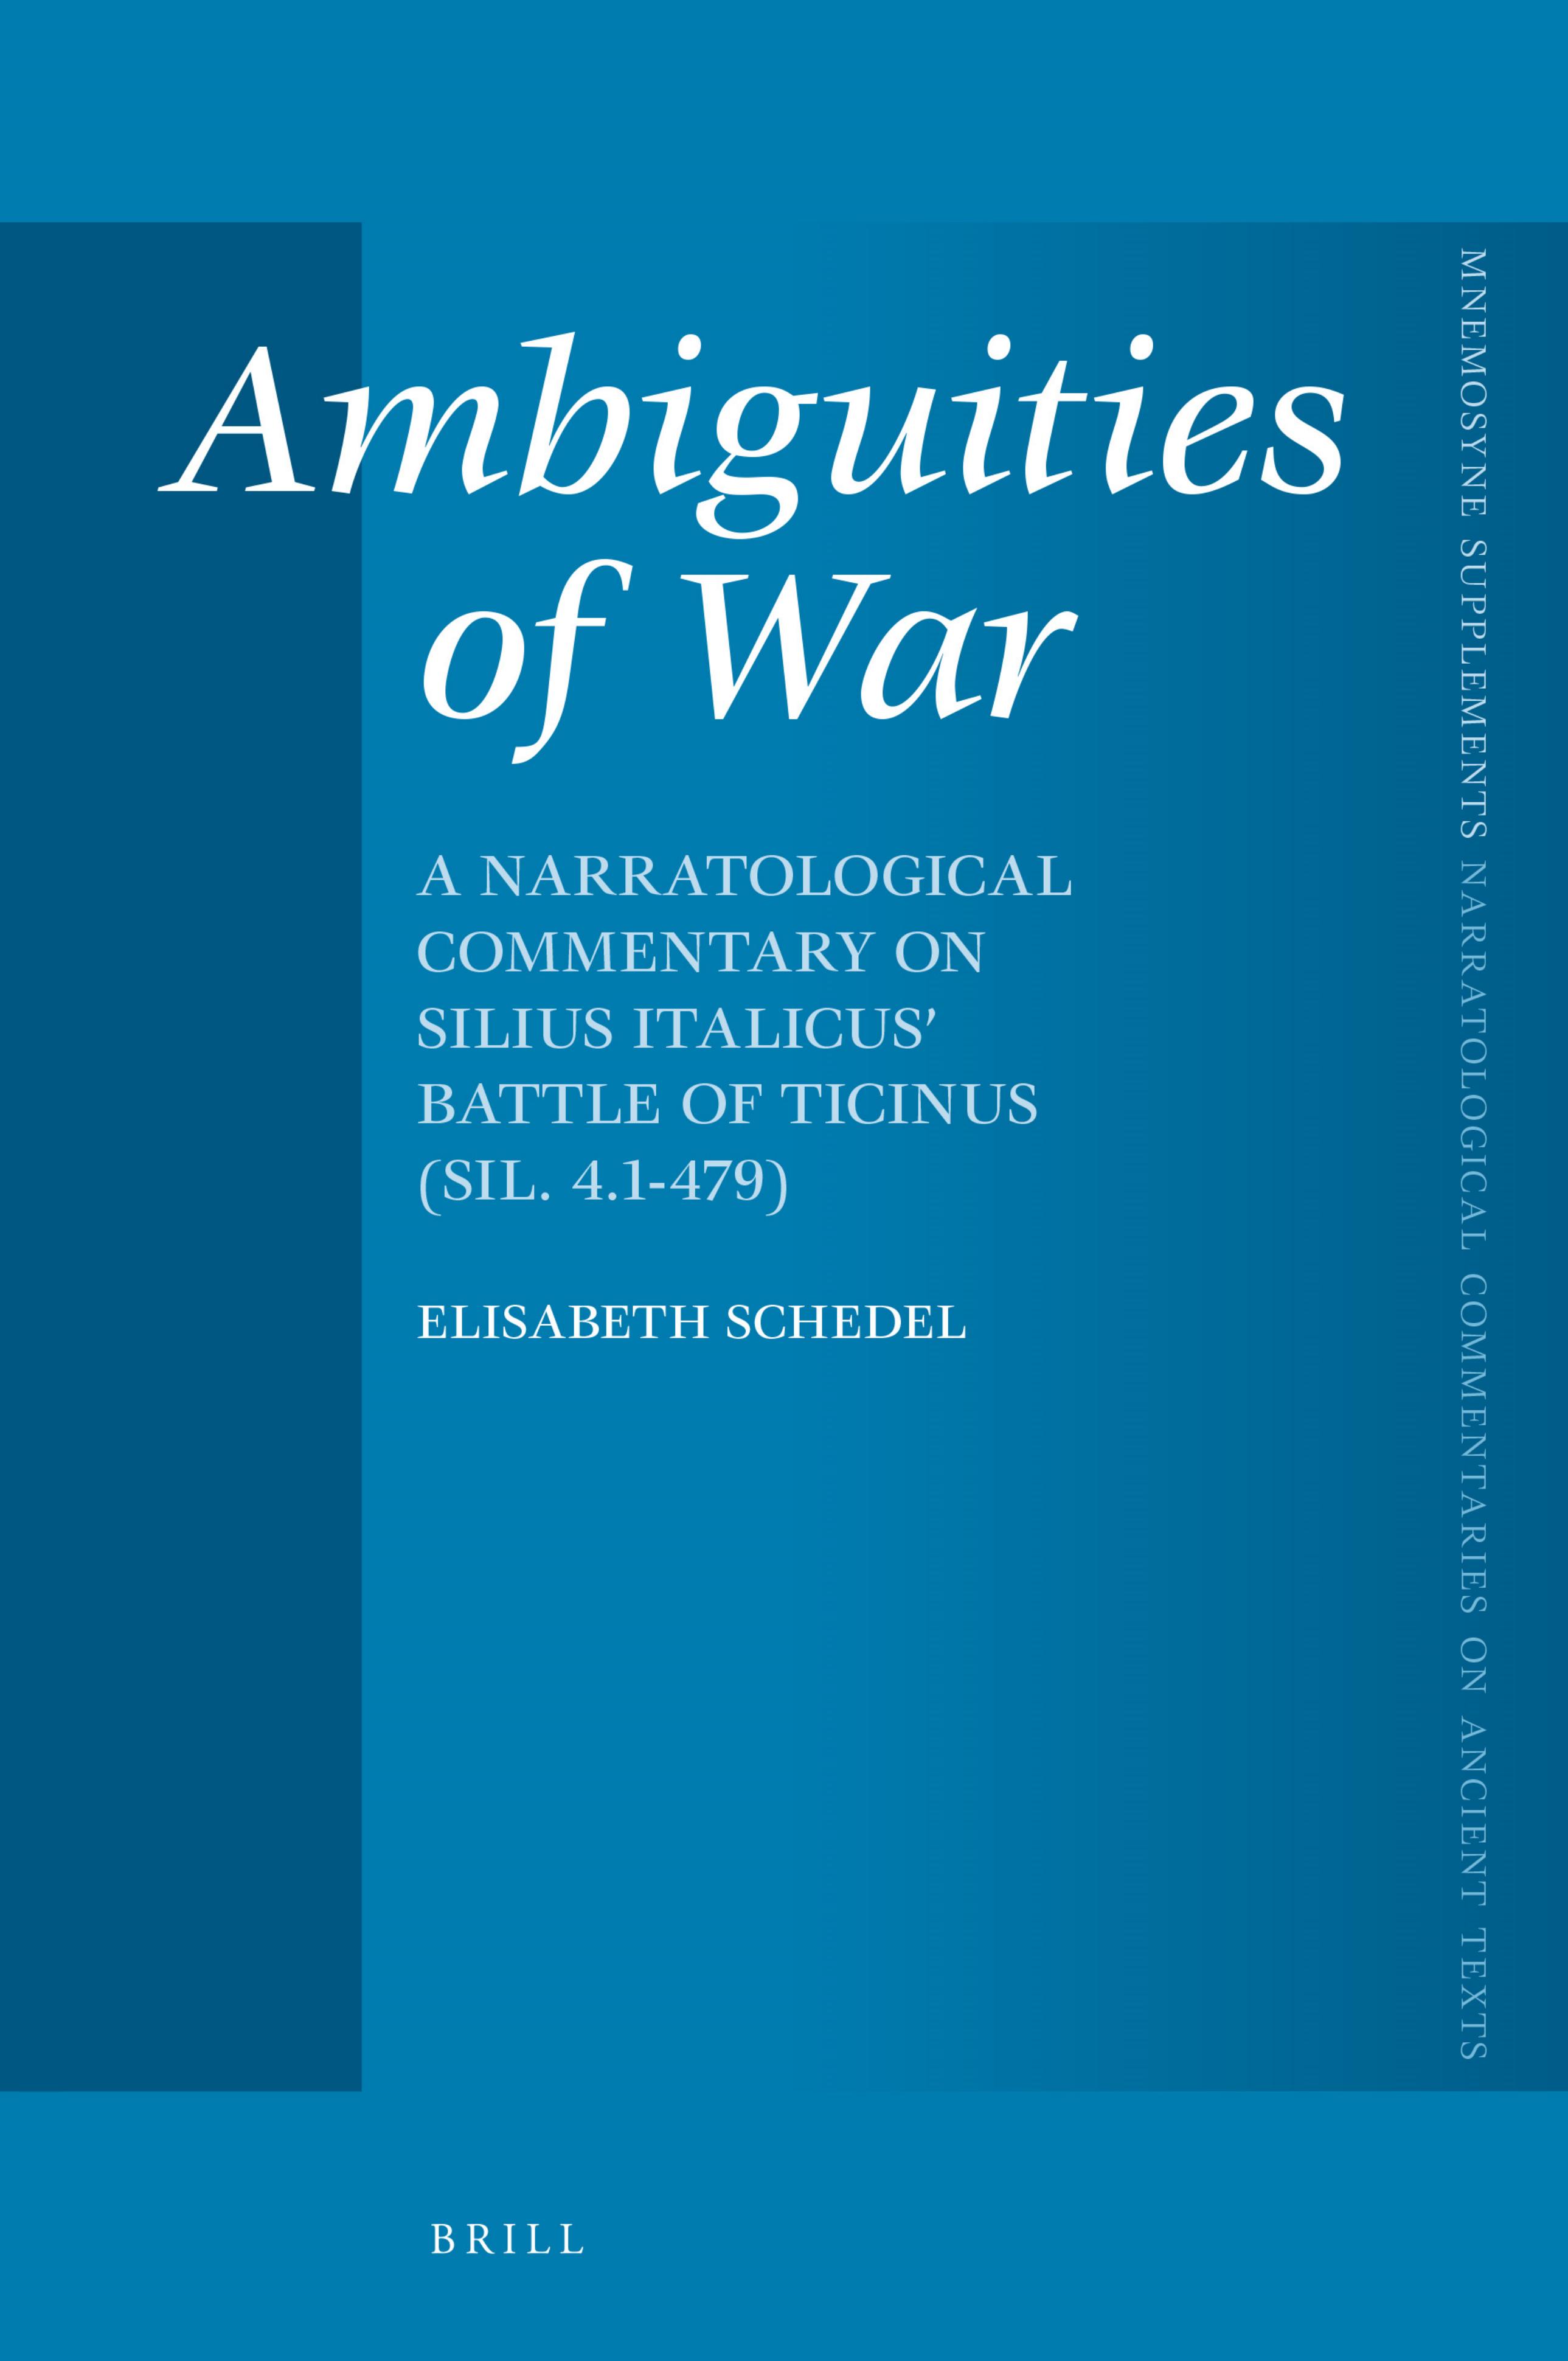 Ambiguities of War: A Narratological Commentary on Silius Italicus' Battle of Ticinus (Sil. 4.1-479) by Elisabeth Schedel;